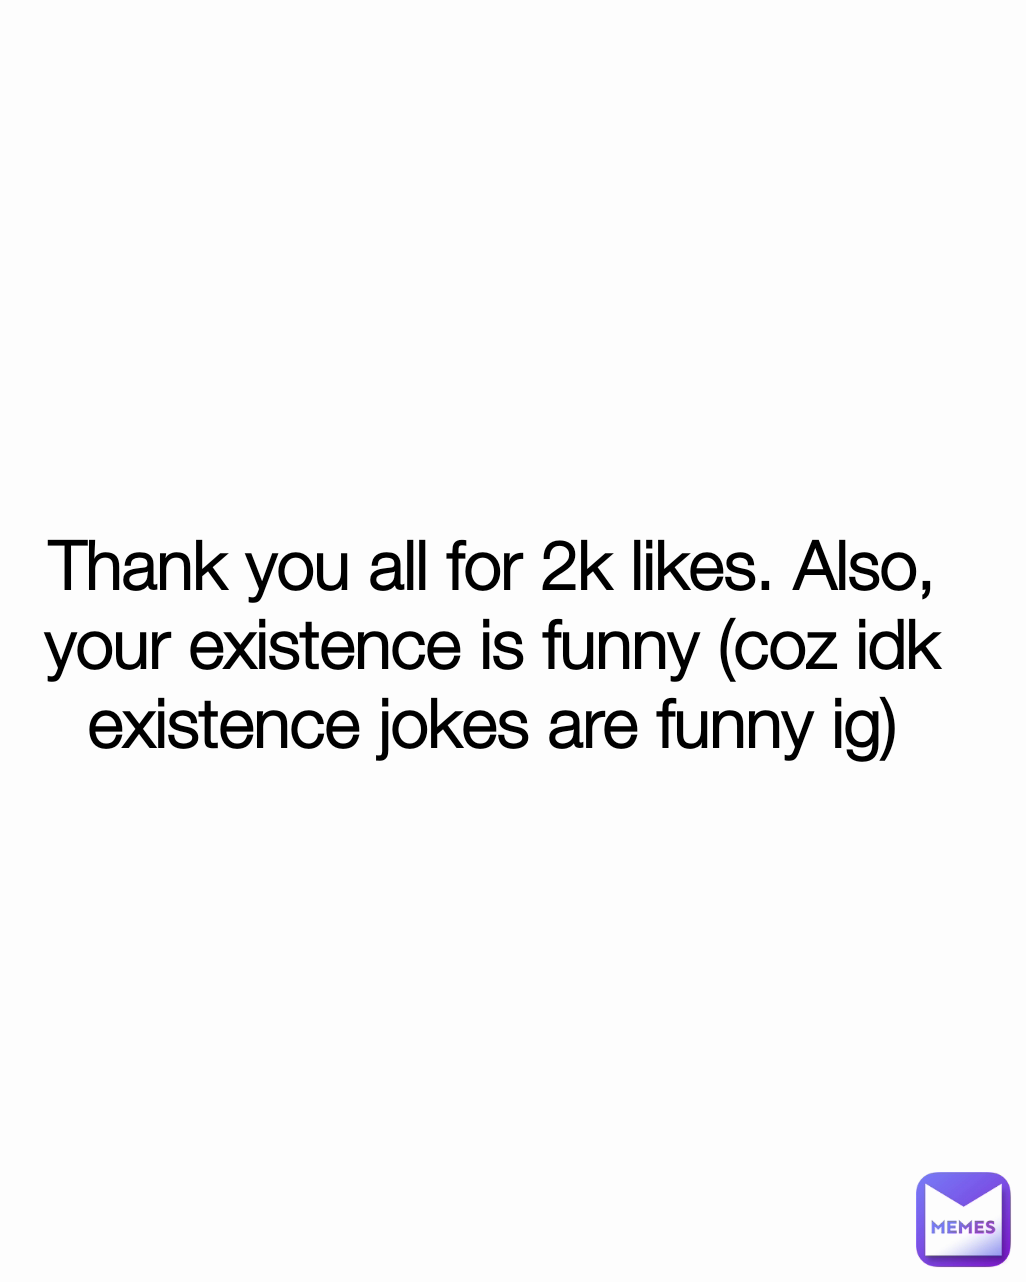 Thank you all for 2k likes. Also, your existence is funny (coz idk existence jokes are funny ig)